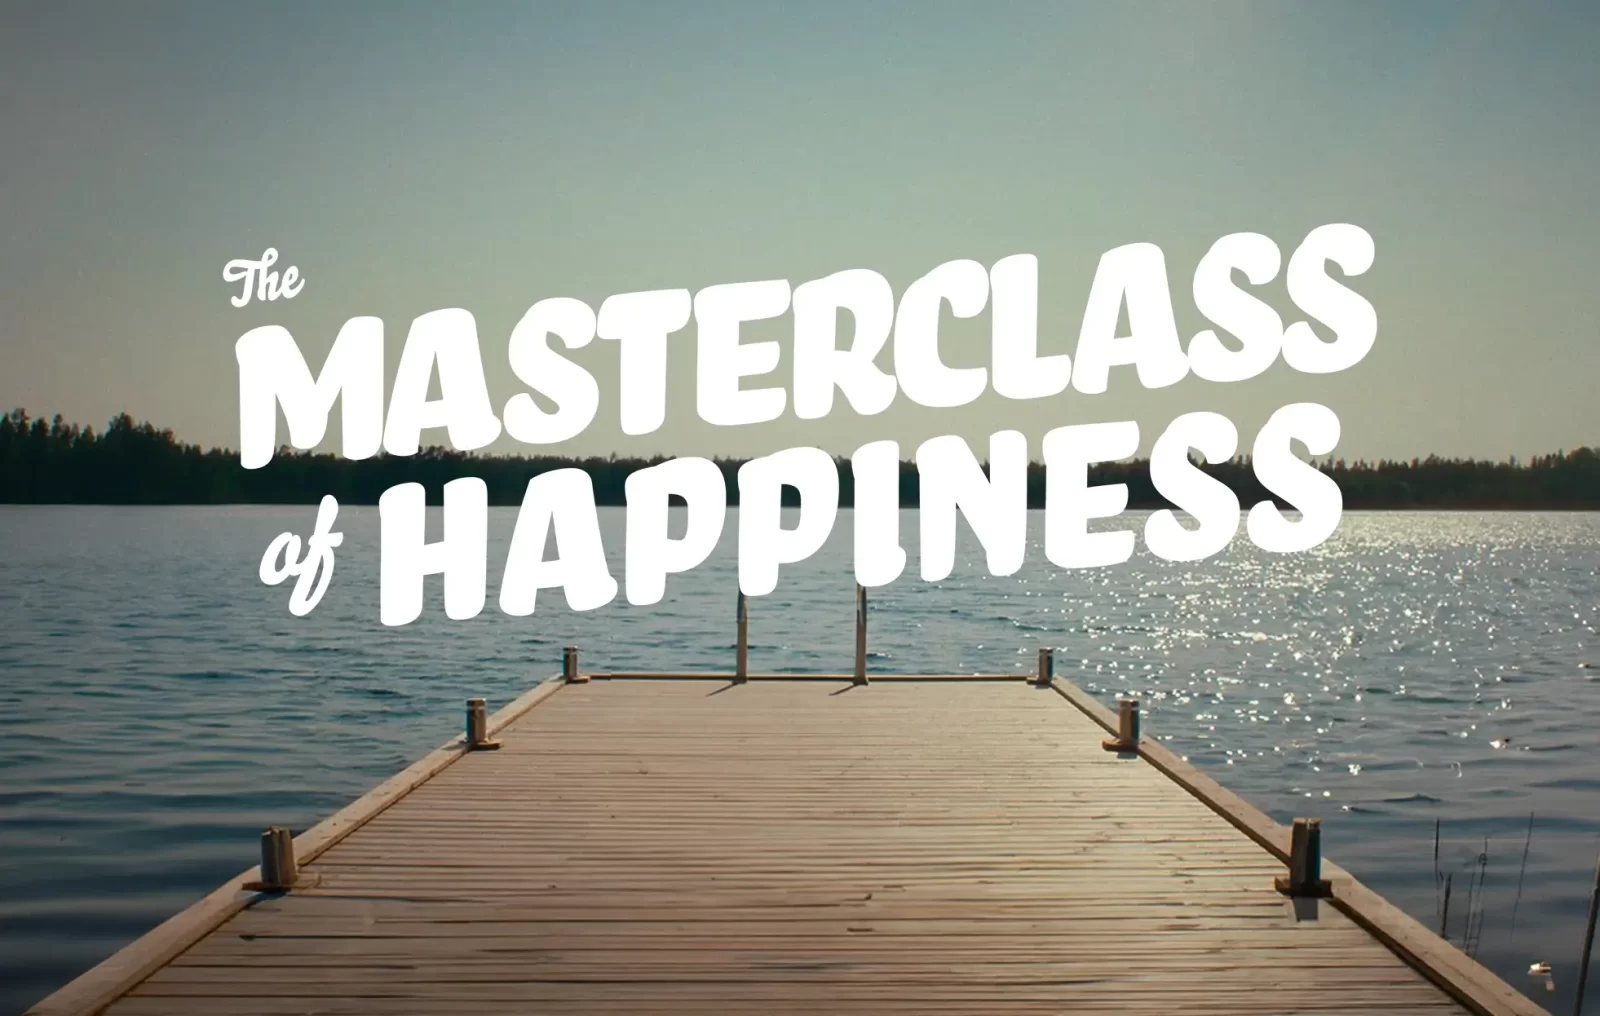 Visit Finland, Masterclass of Happiness, Campaigns of the world, world's happiest country